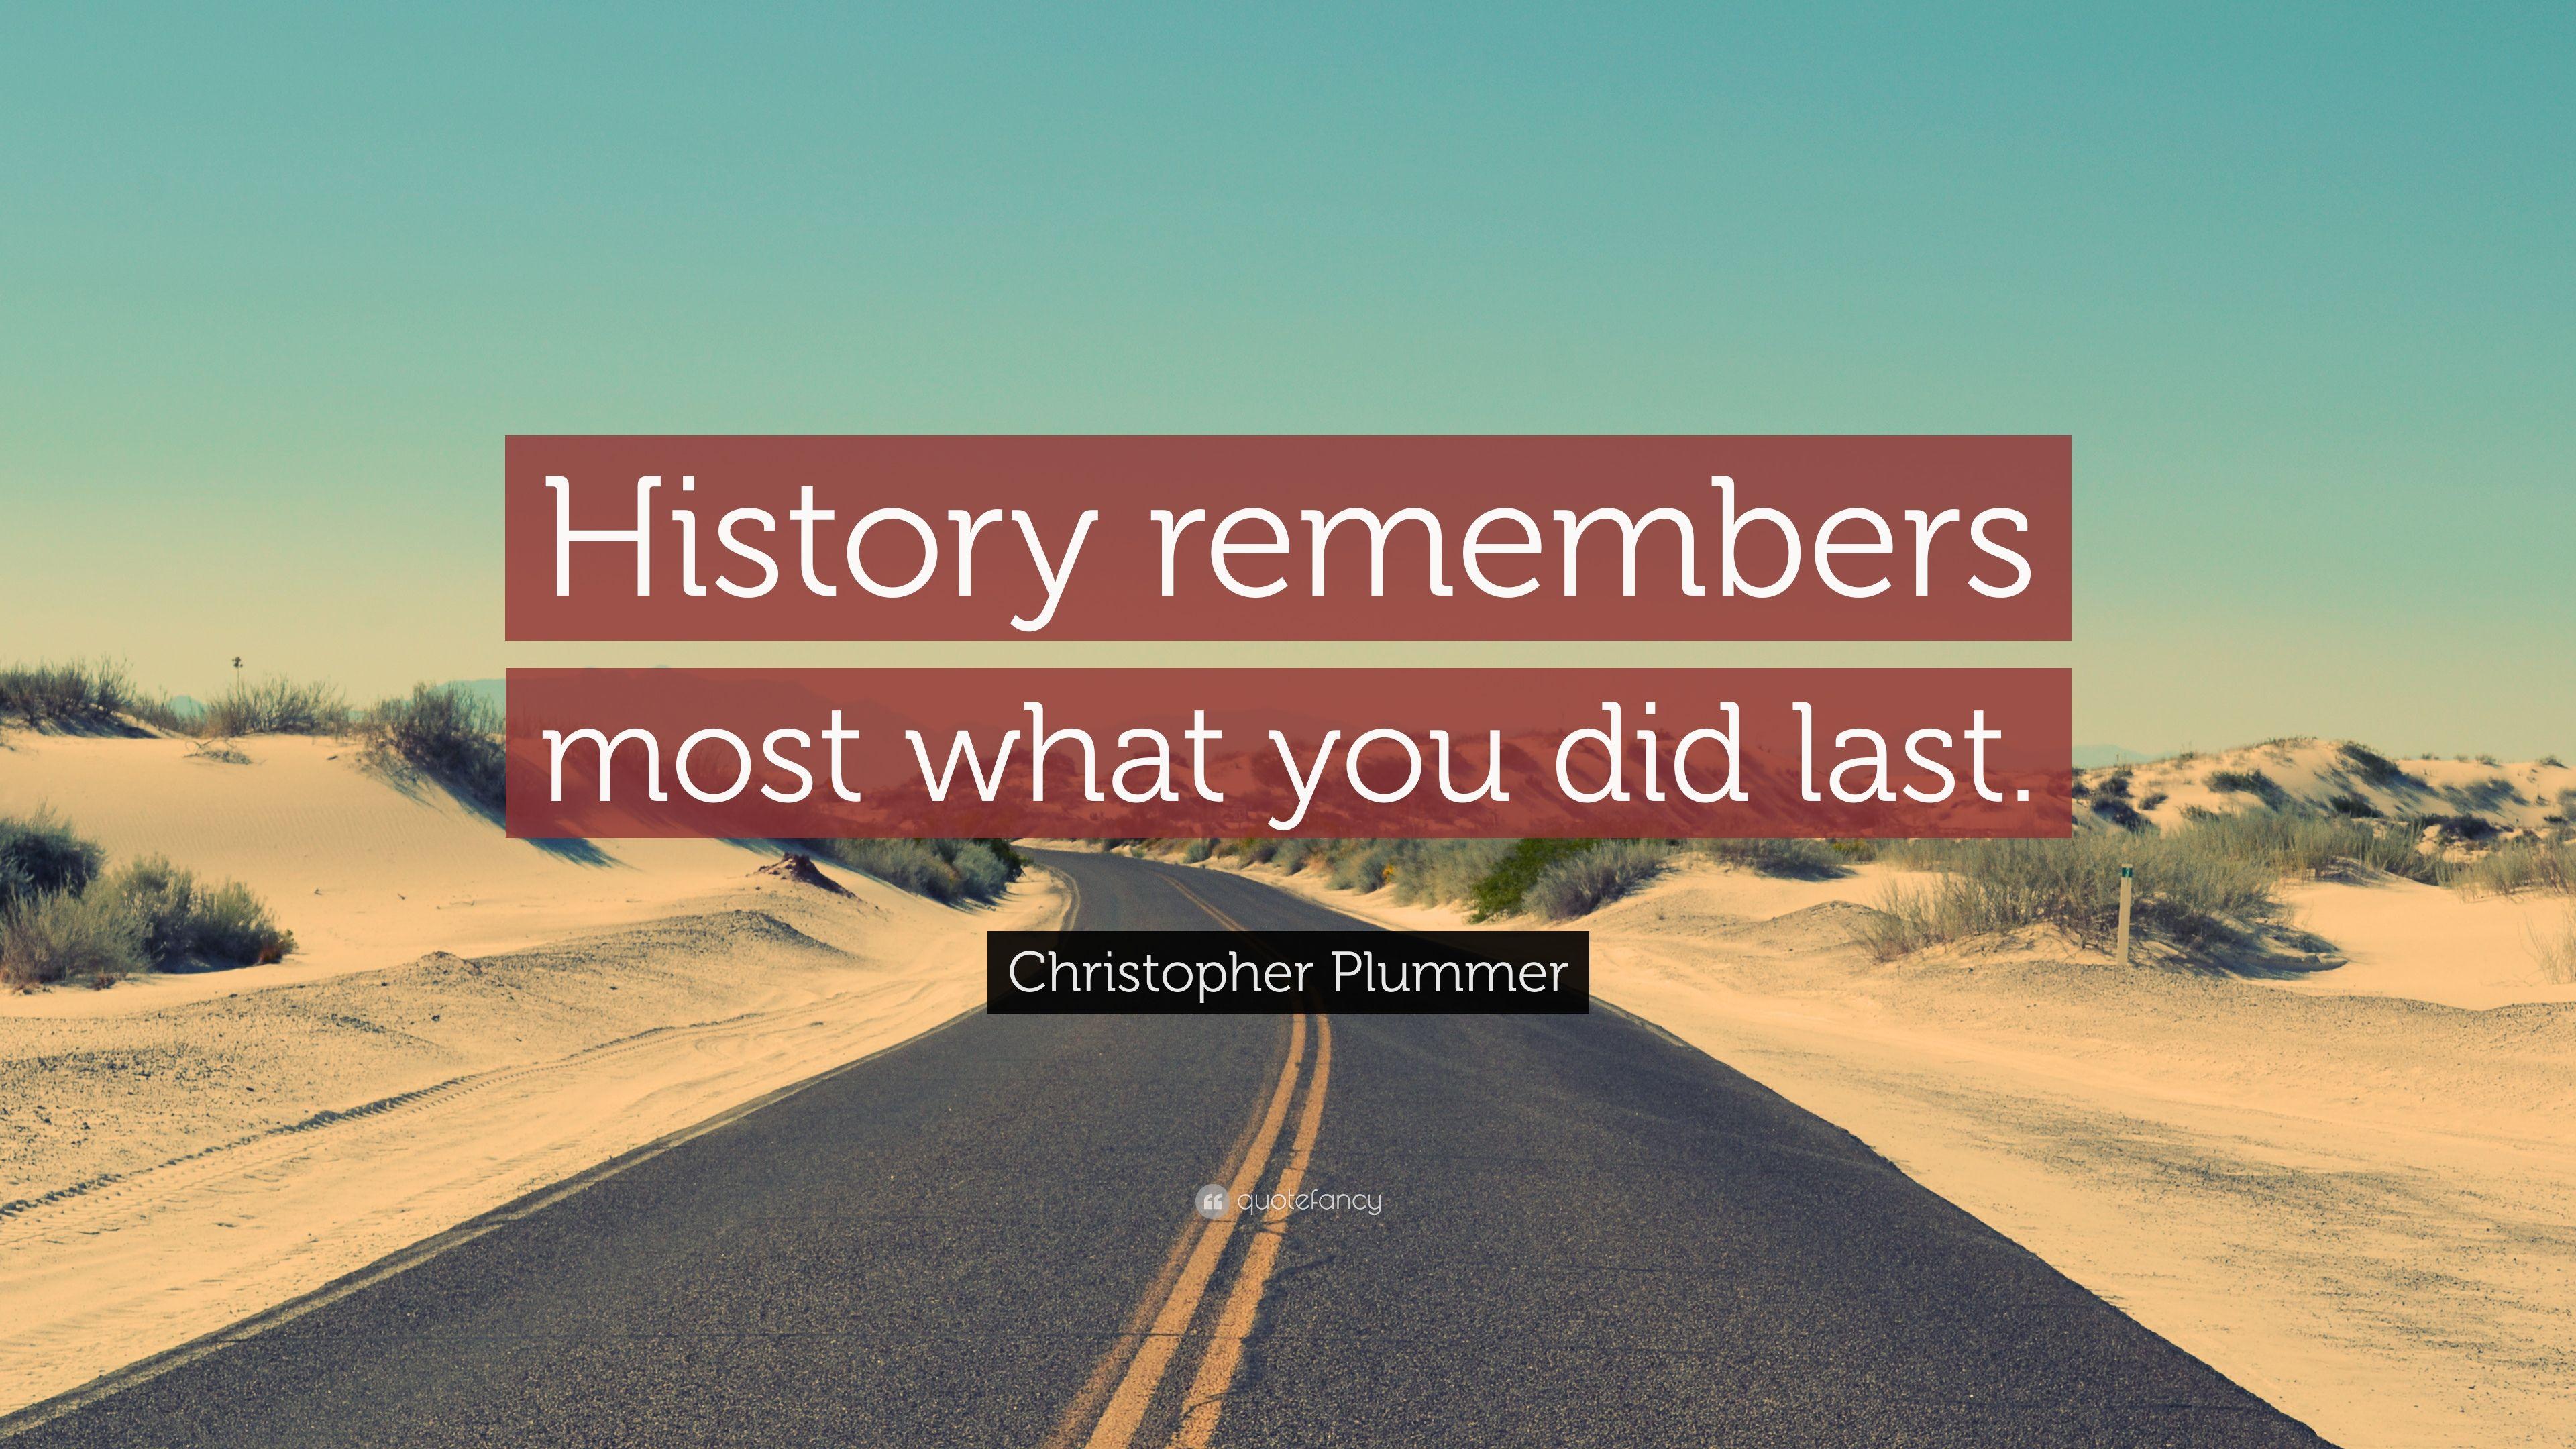 Christopher Plummer Quote: “History remembers most what you did